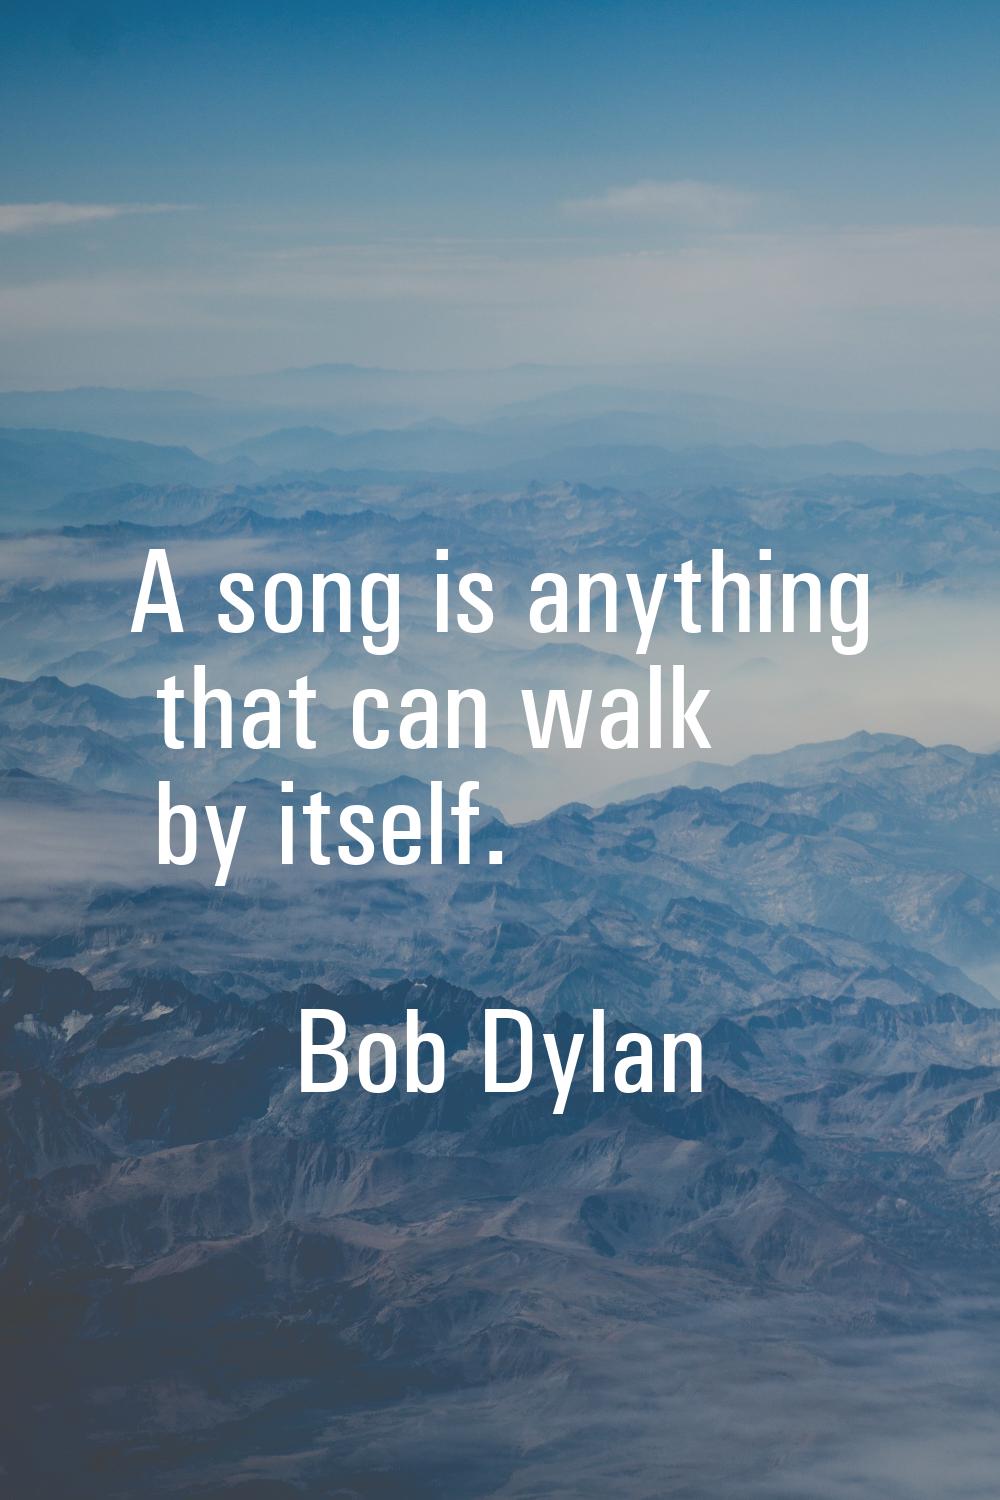 A song is anything that can walk by itself.